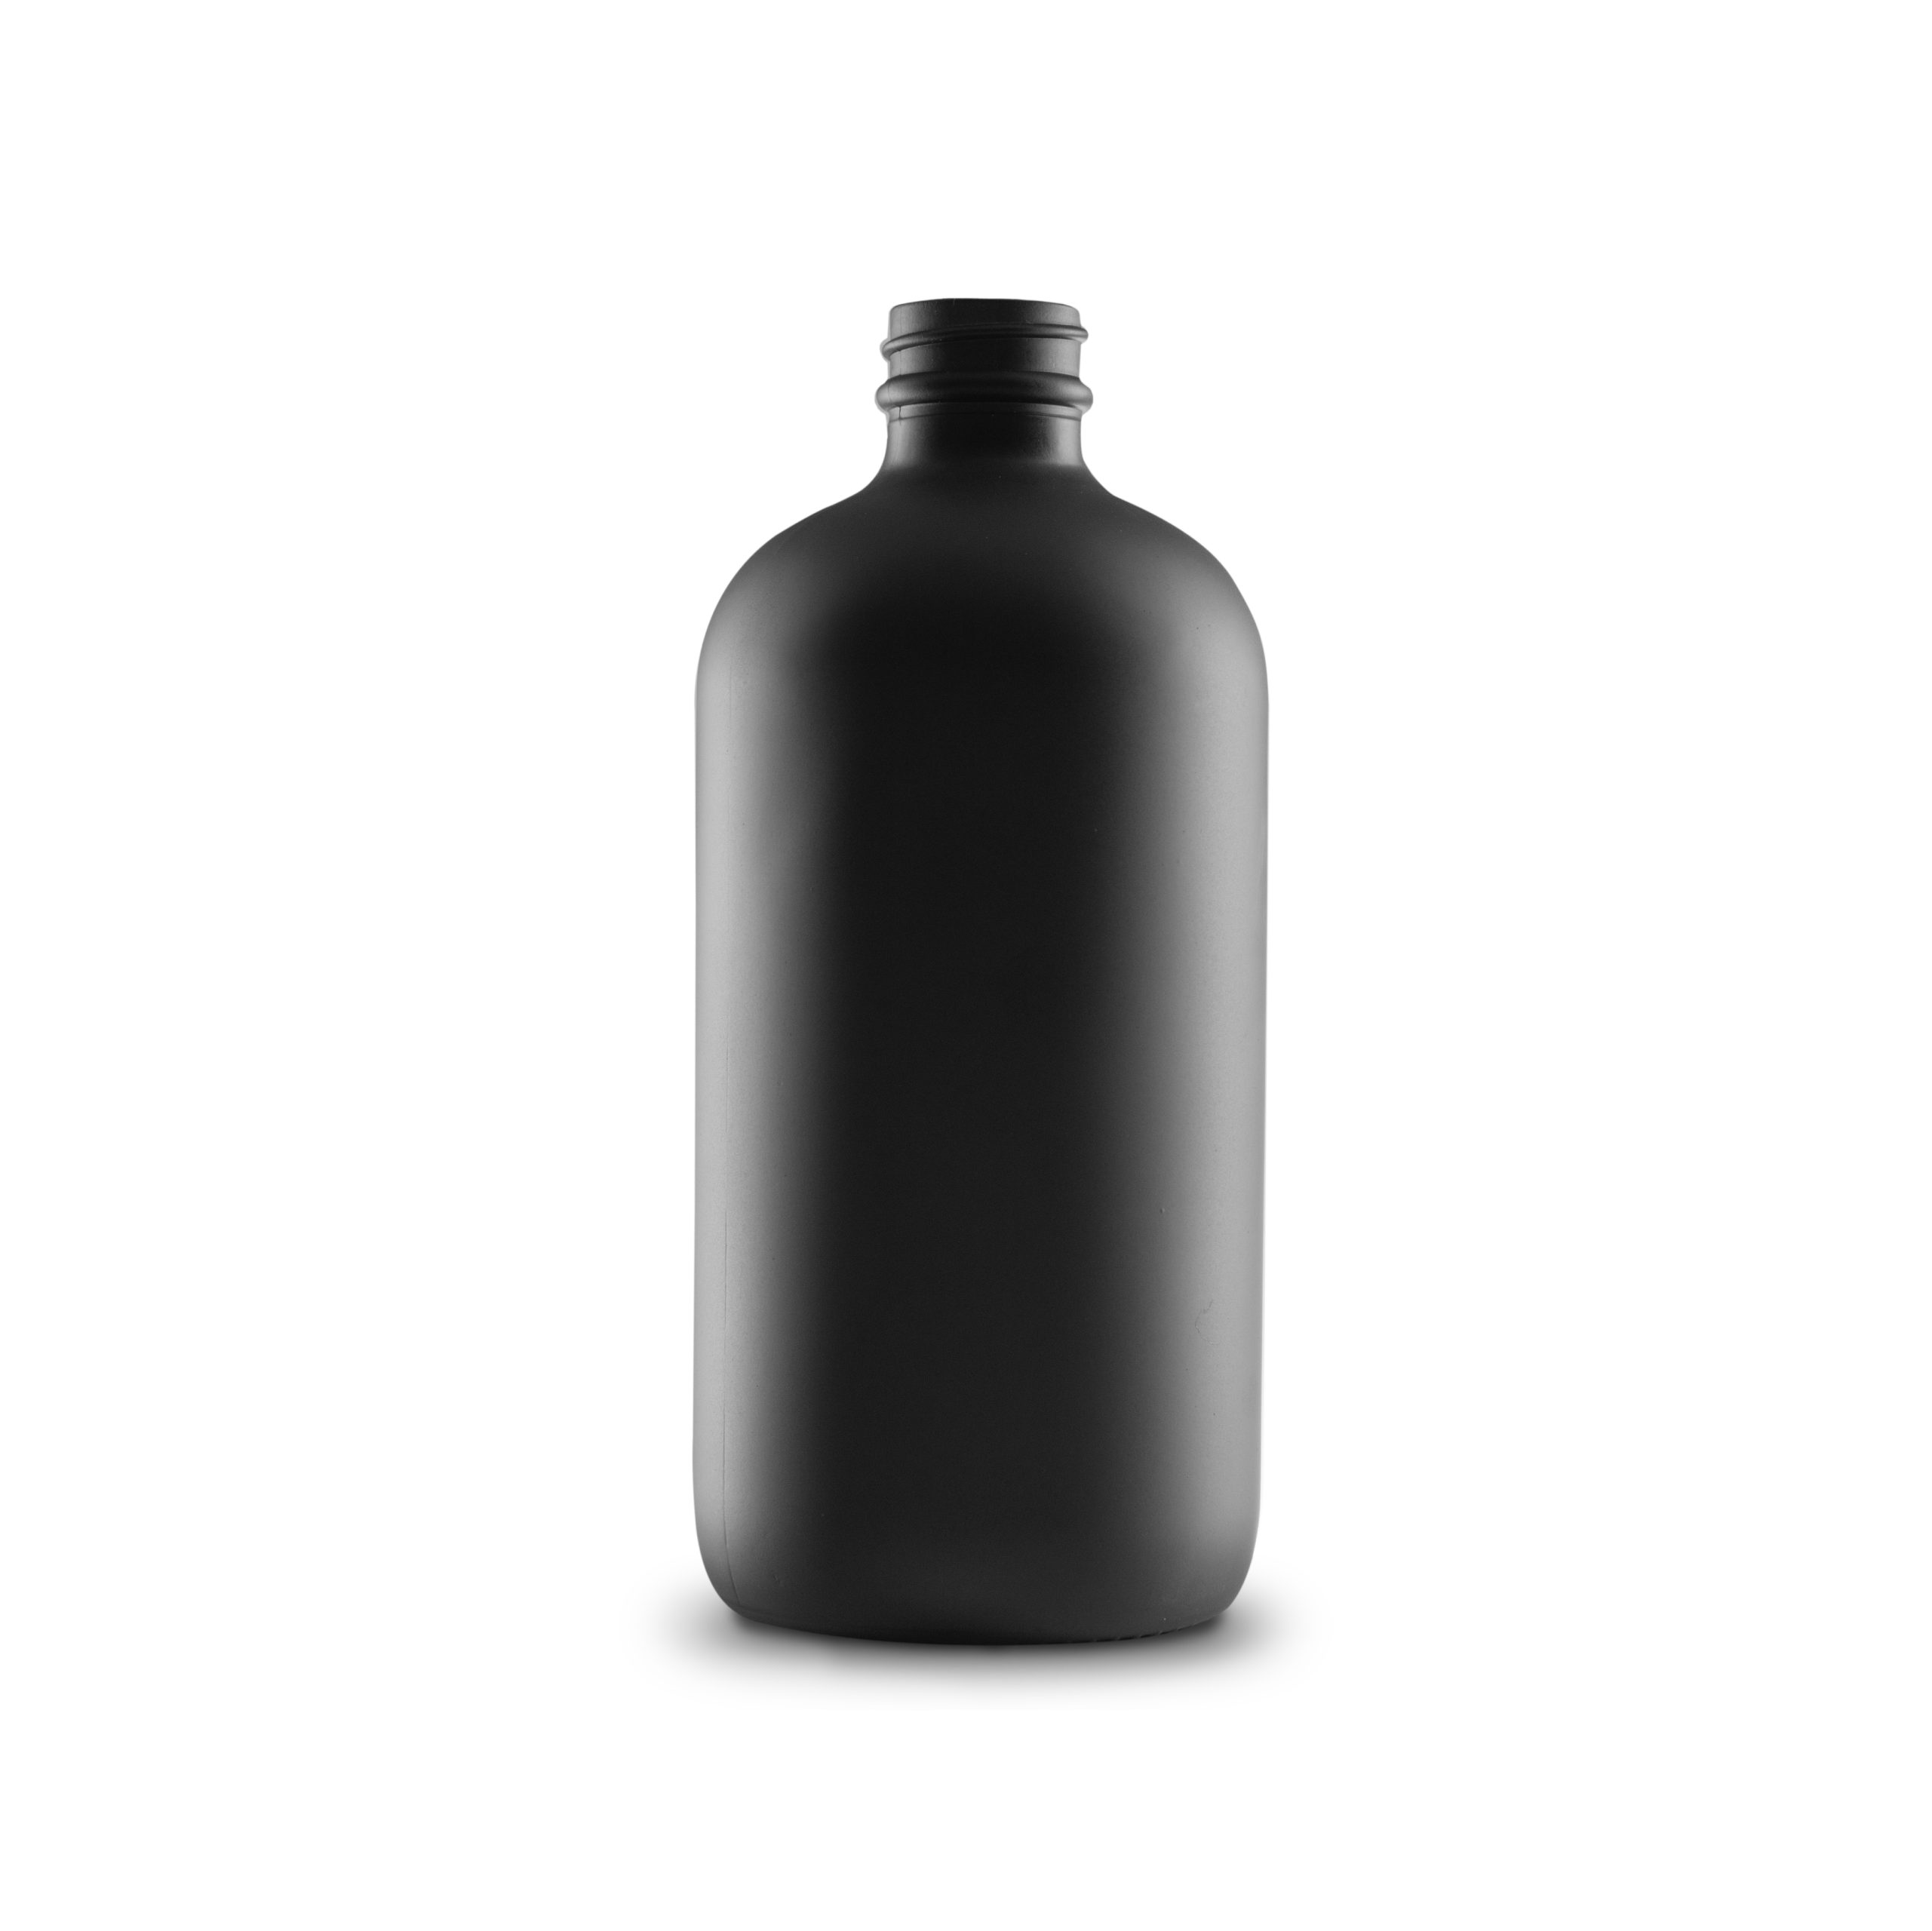 16 oz black frosted boston round glass bottle are ideal for packaging hair care products such as conditioners, shampoos and more